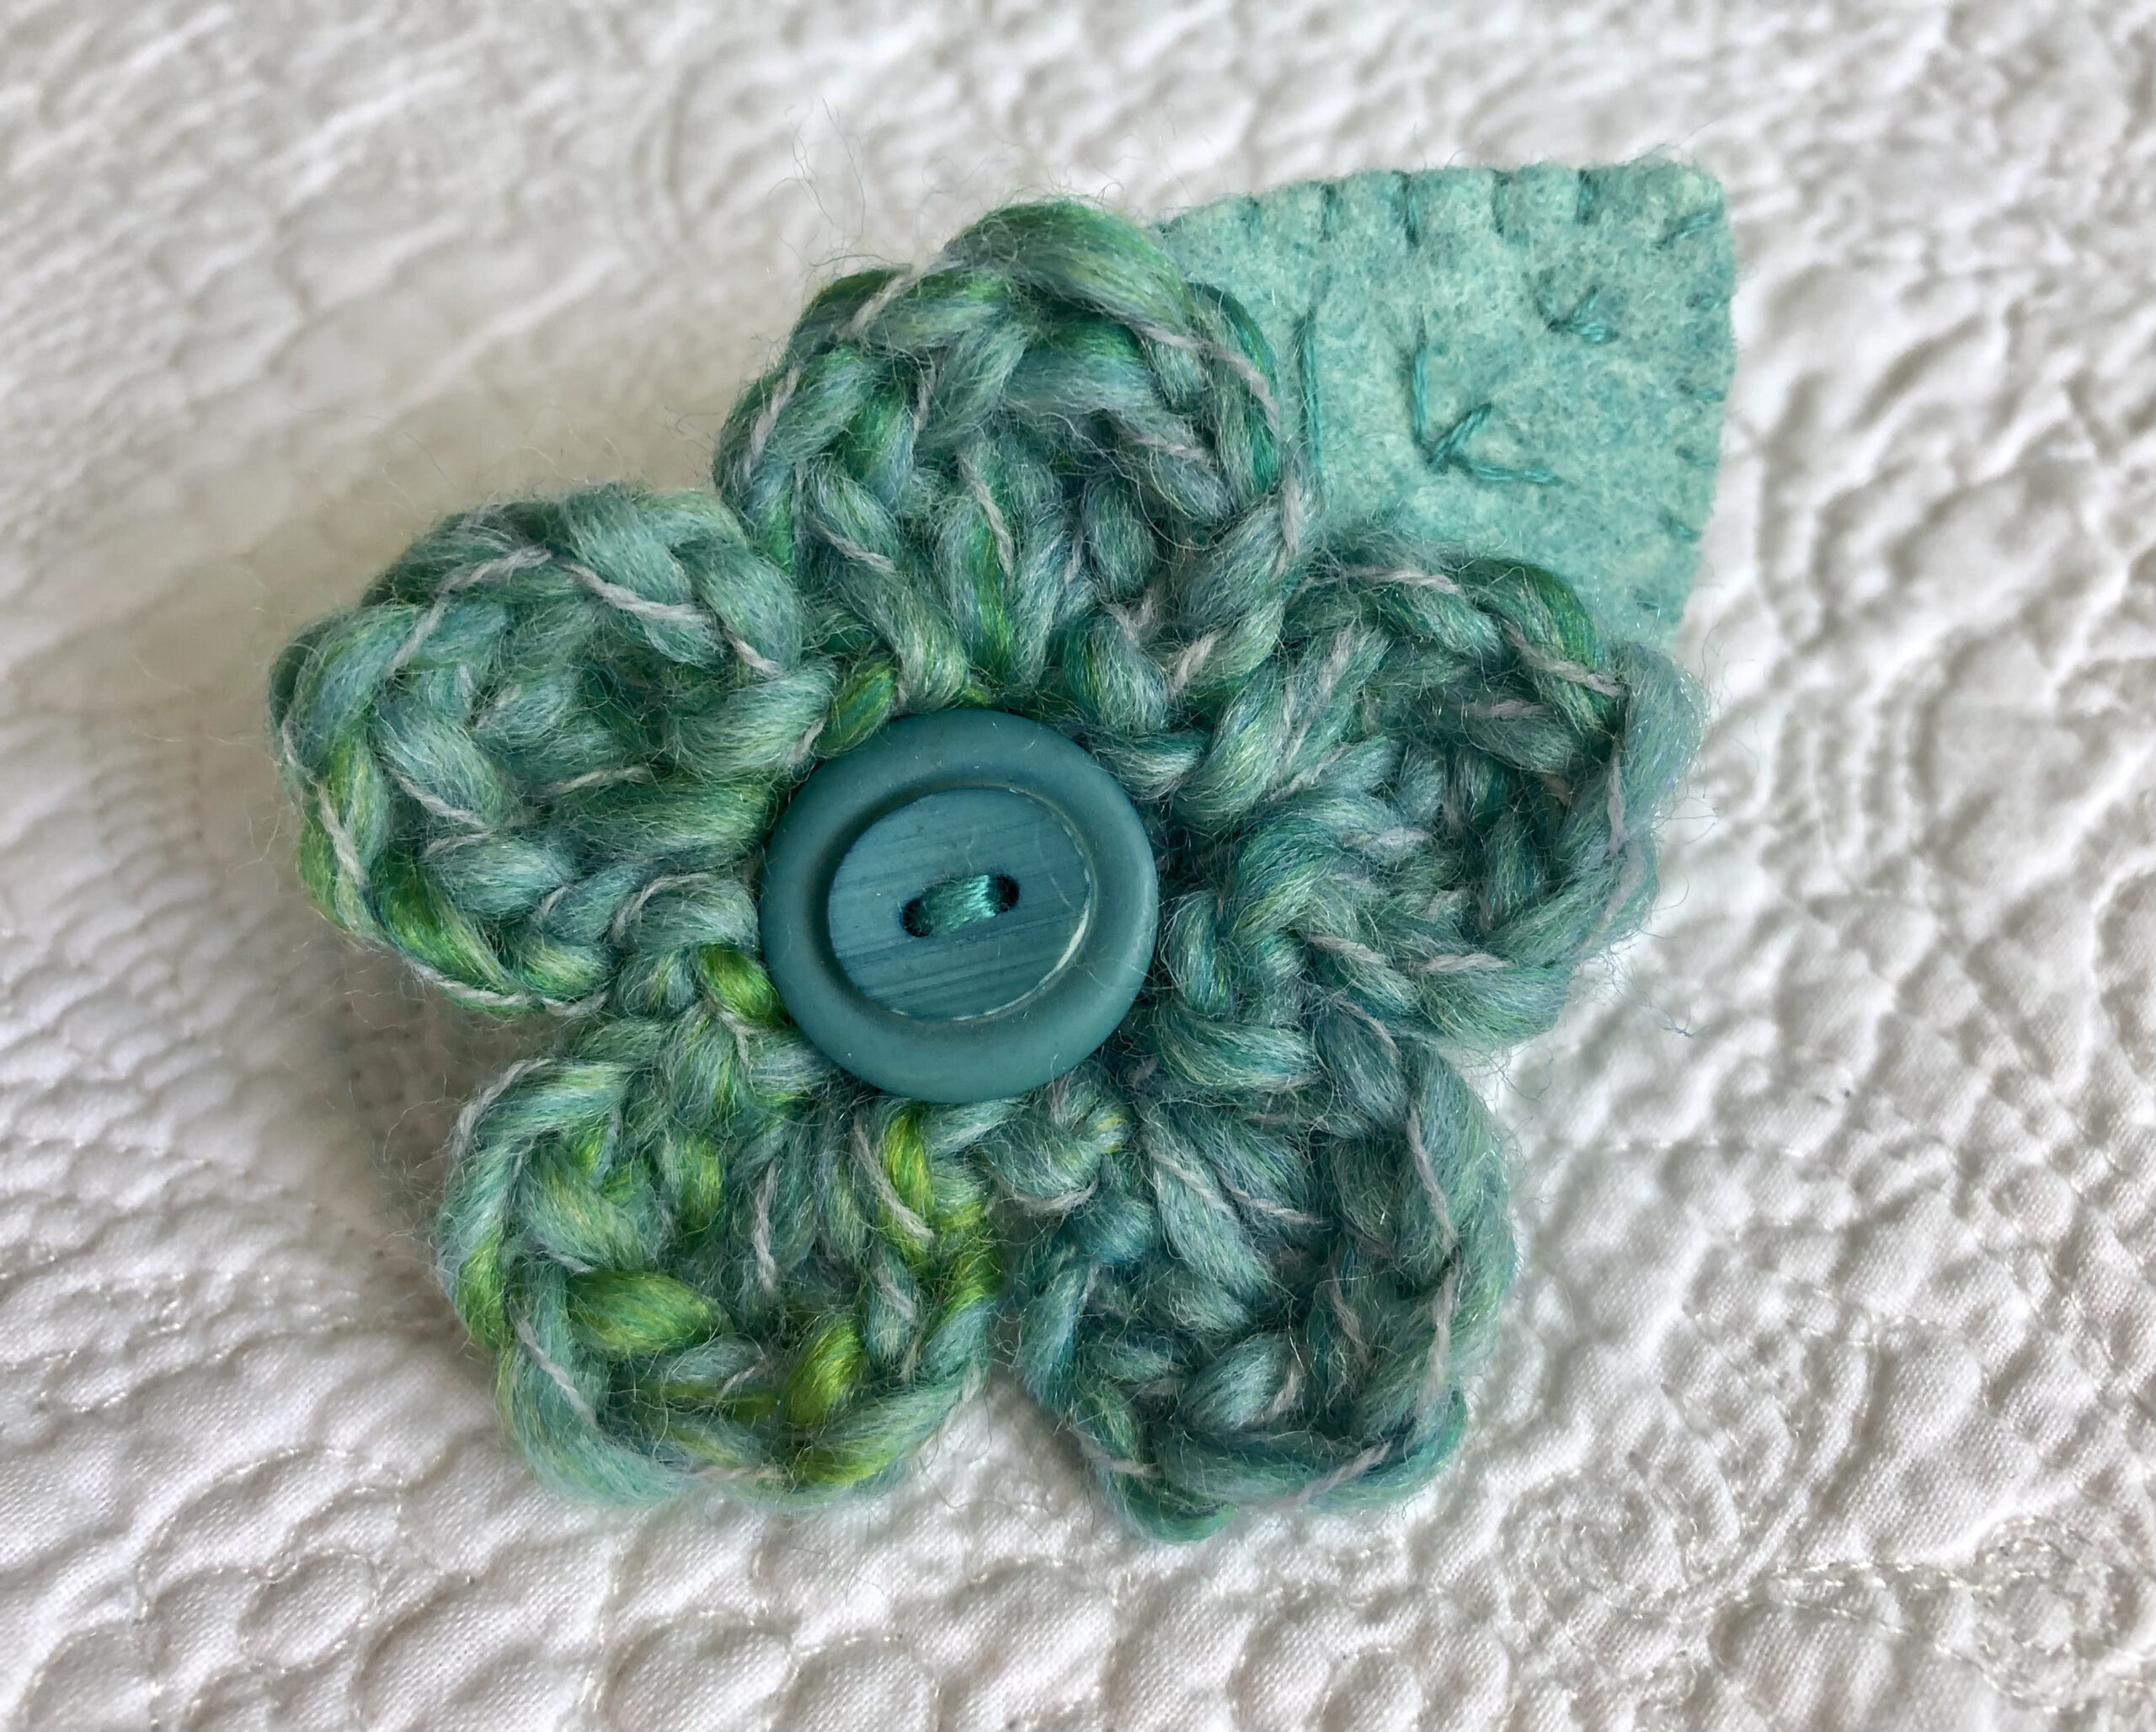 Flower and leaf brooch in greens.